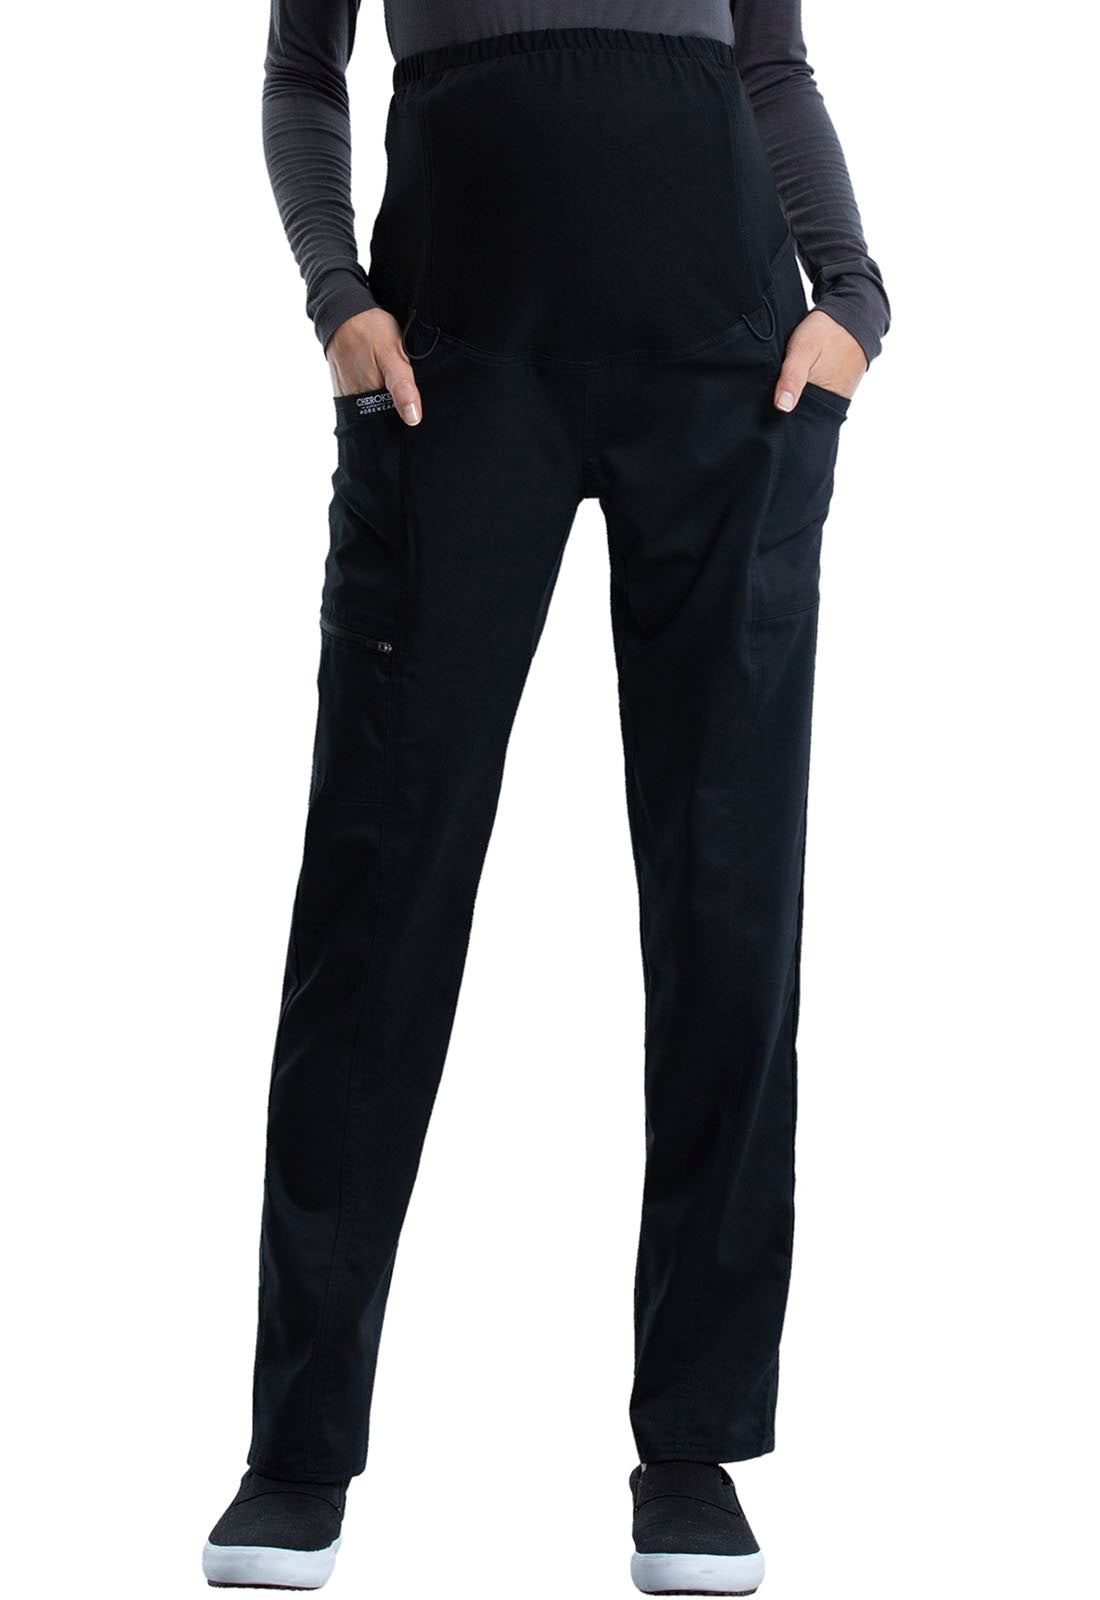 8729 Med Couture Plus One Maternity Jogger Scrub Pants 